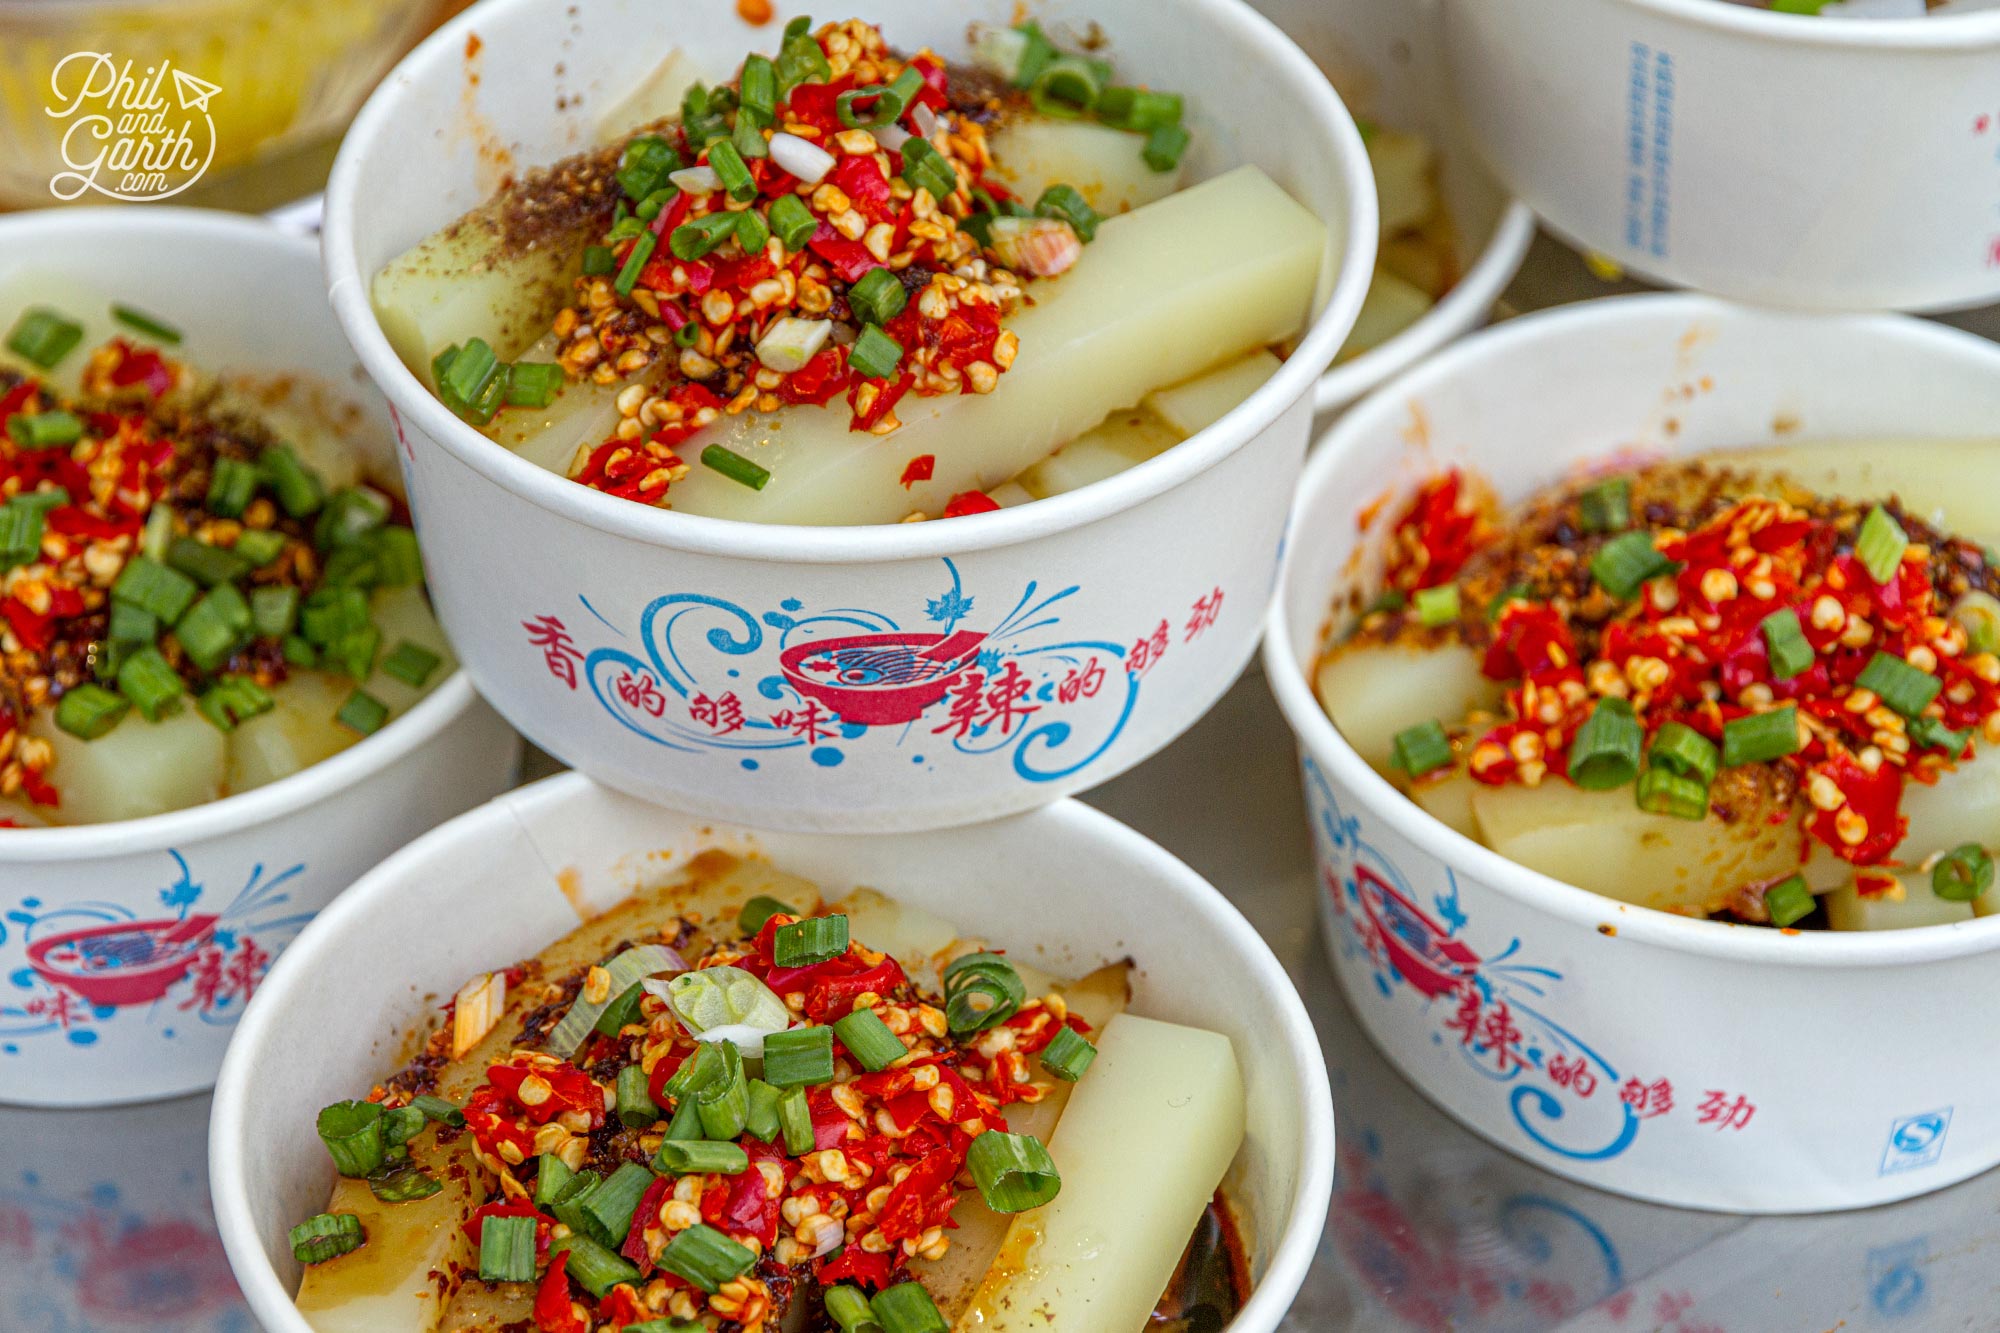 Sichuan food is well known for being the spiciest food in China. This street food snack is Spicy Mung Bean Jelly